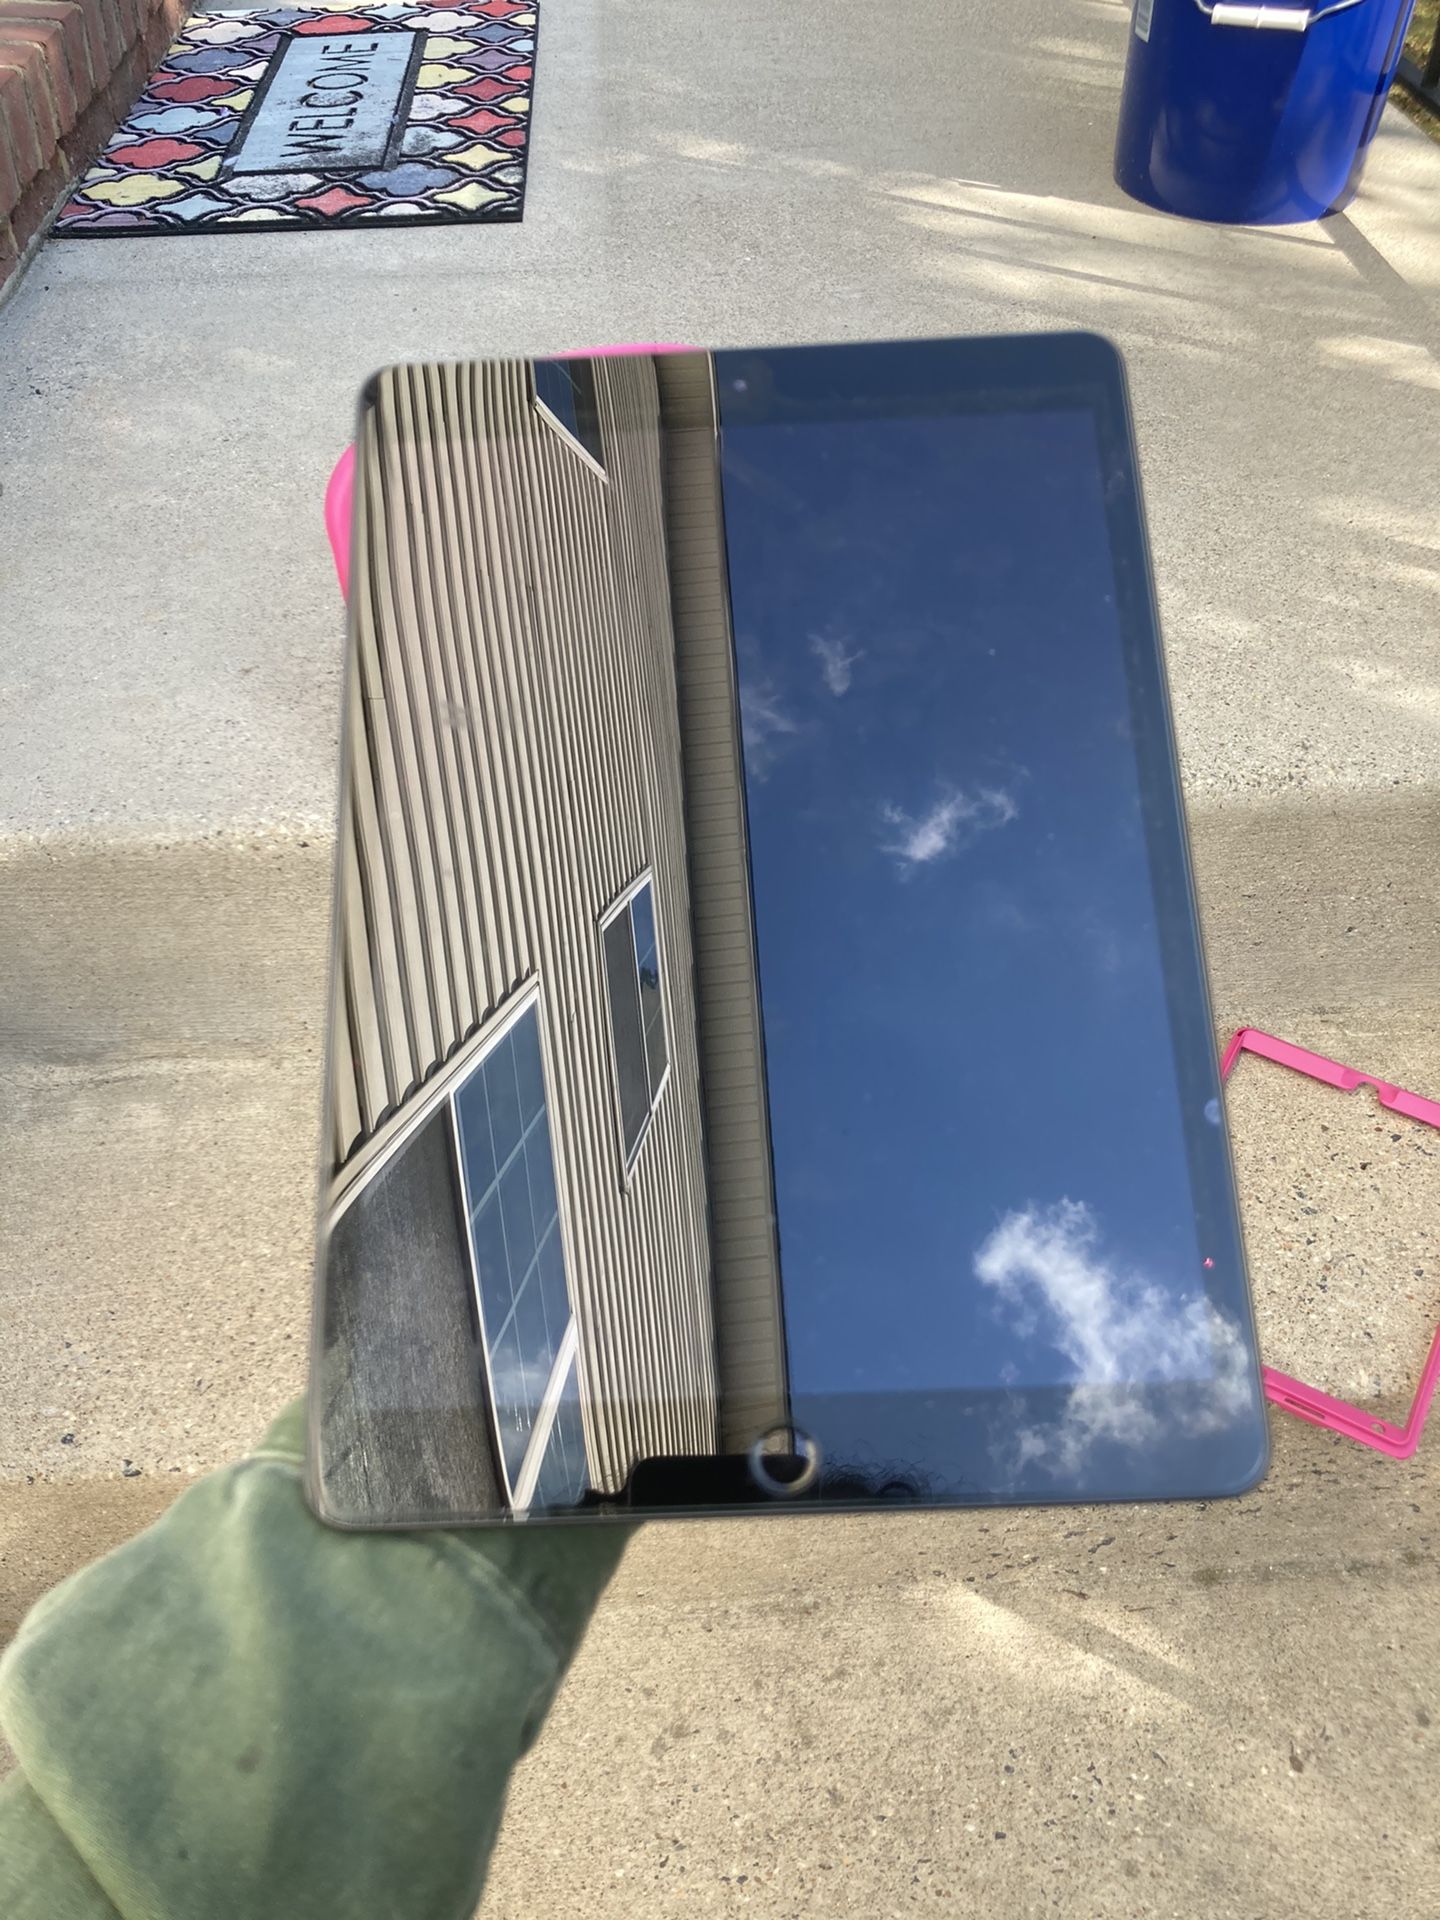 7th generation Ipad 126GB with stand & carry case